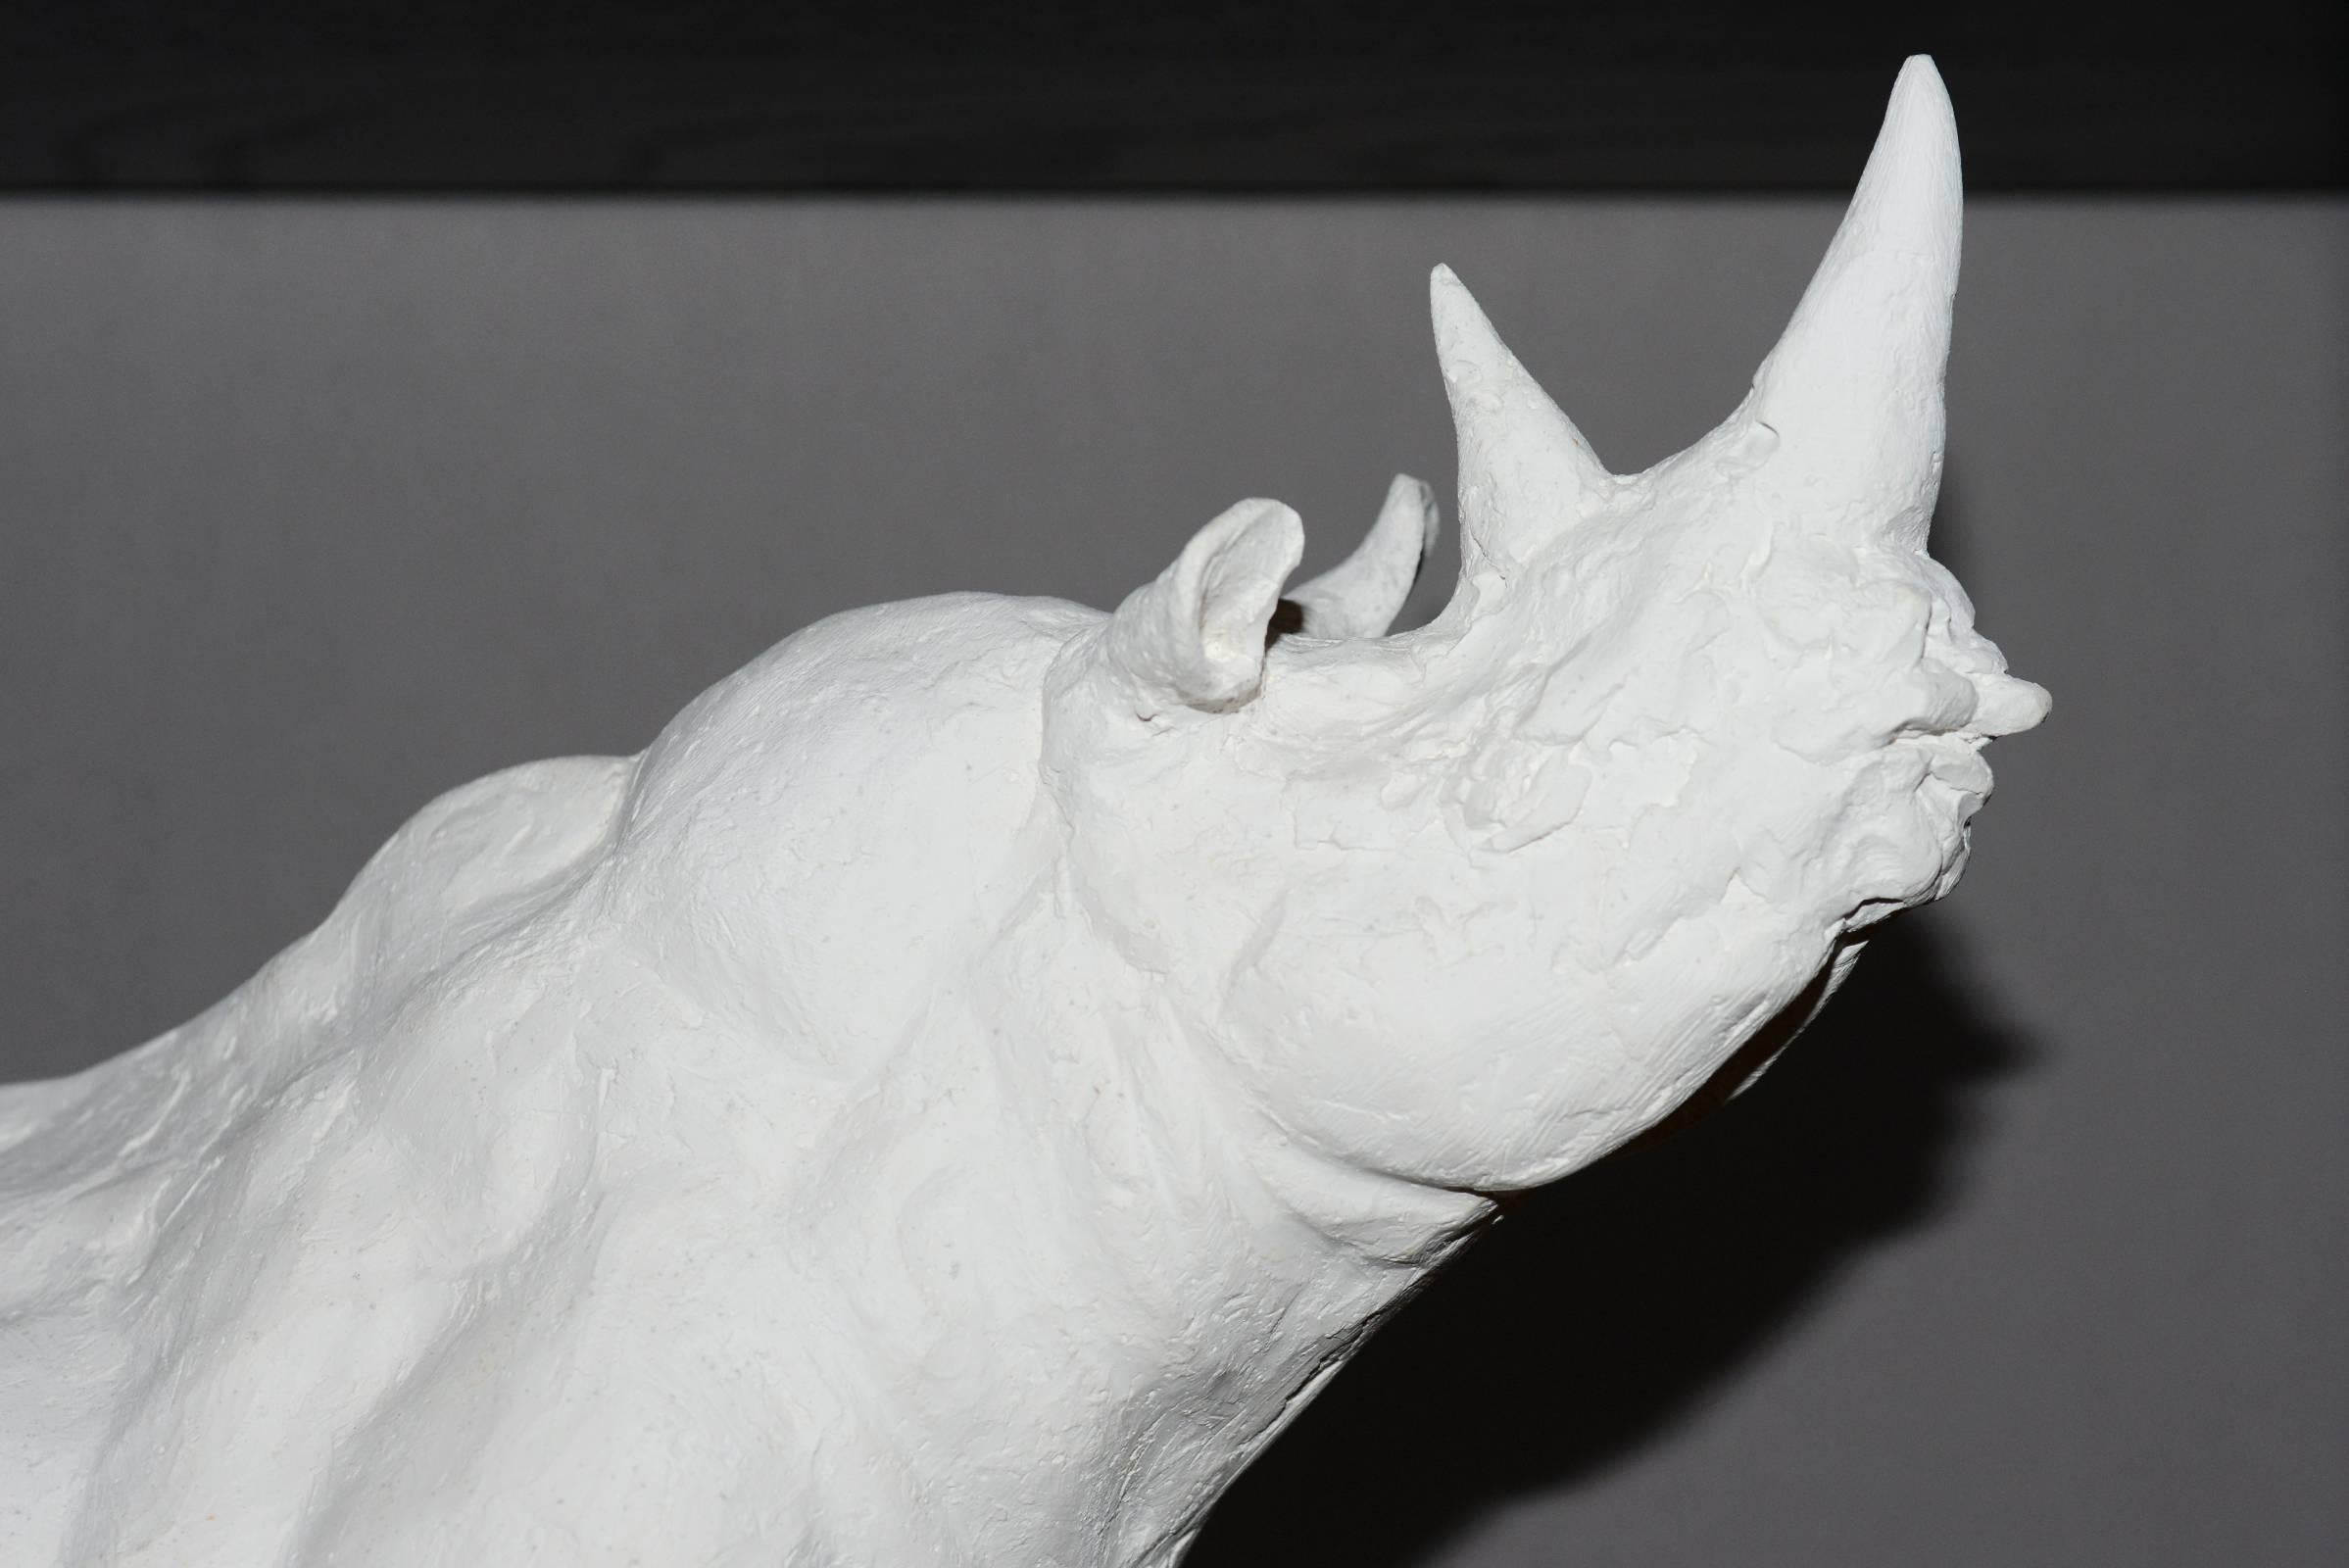 French Sculpture Rhinoceros in Plaster Limited Edition 45/100 by J.B Vandame, 2015 For Sale